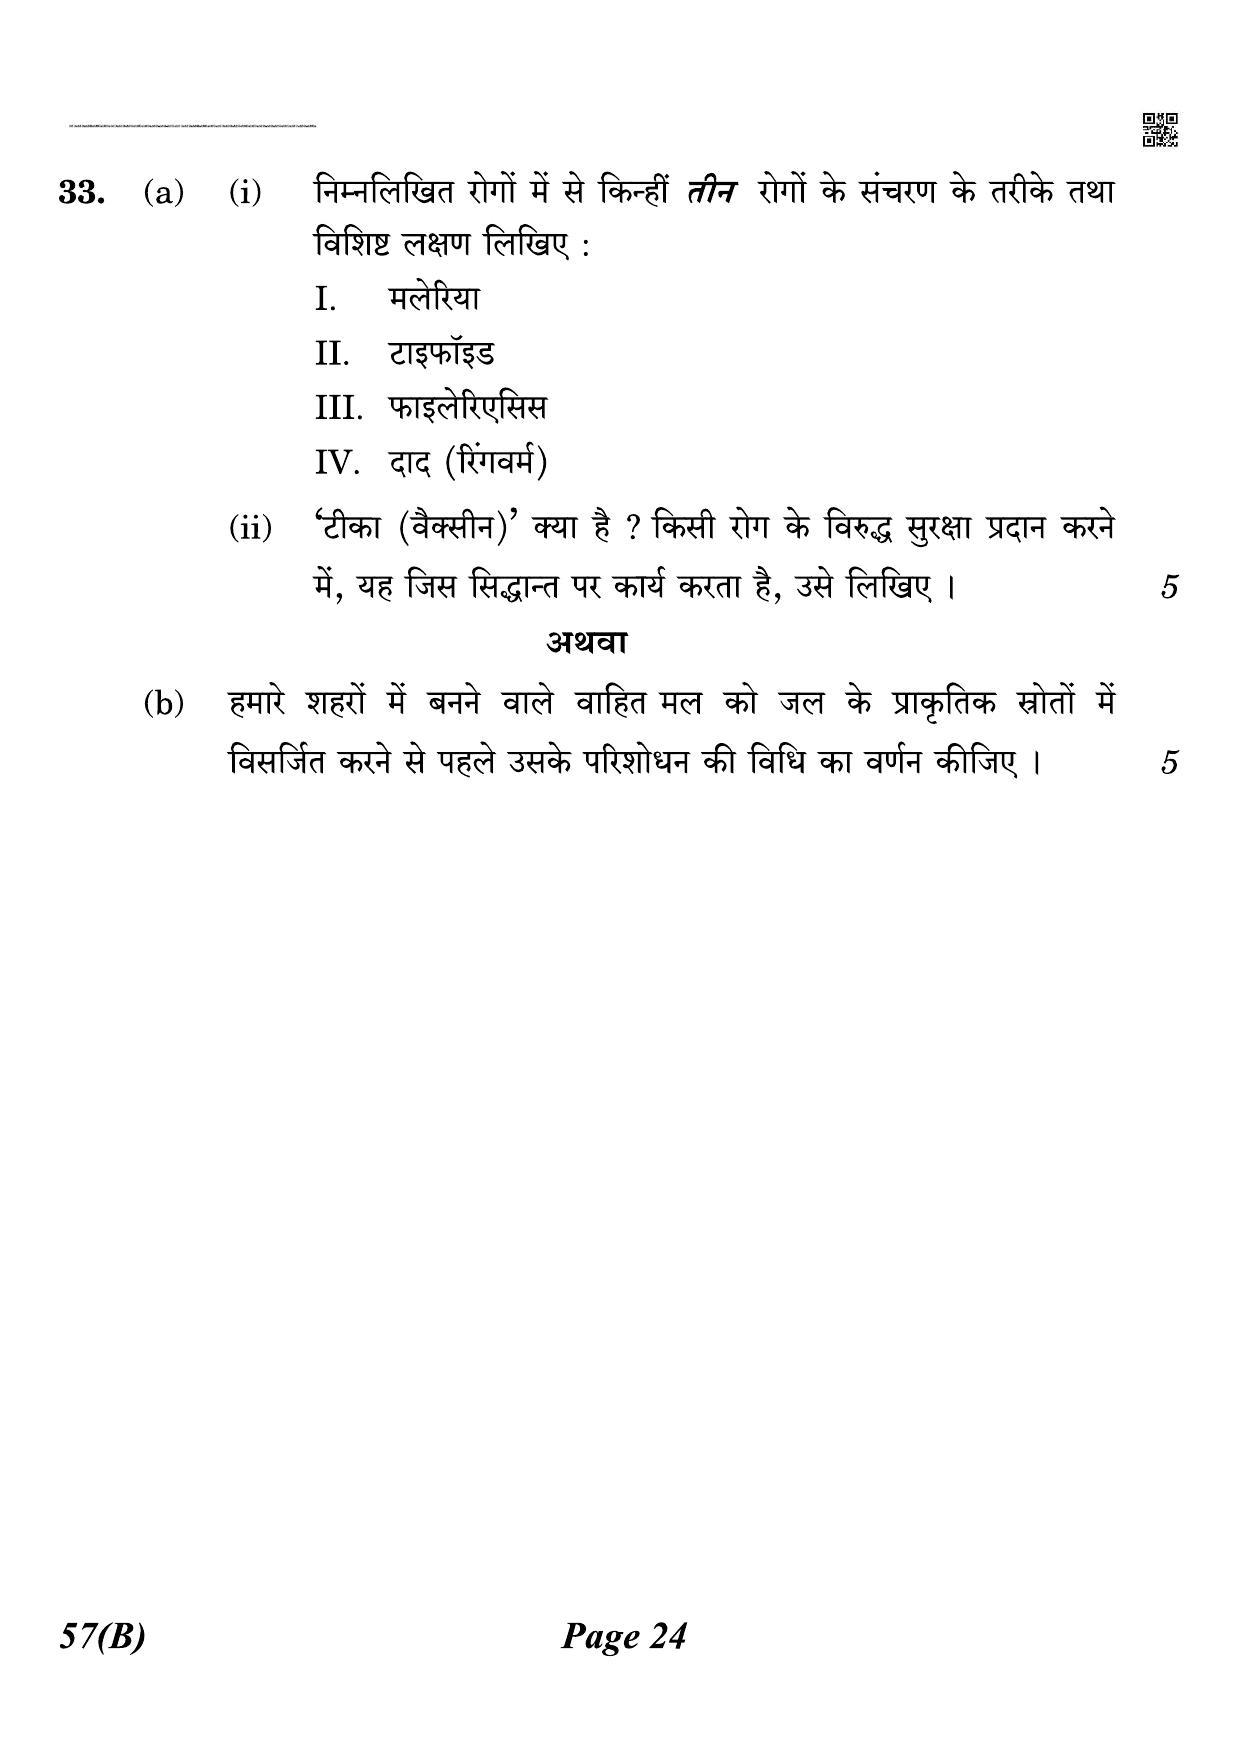 CBSE Class 12 QP_044_biology_for_visually_impared_candidates 2021 Compartment Question Paper - Page 24